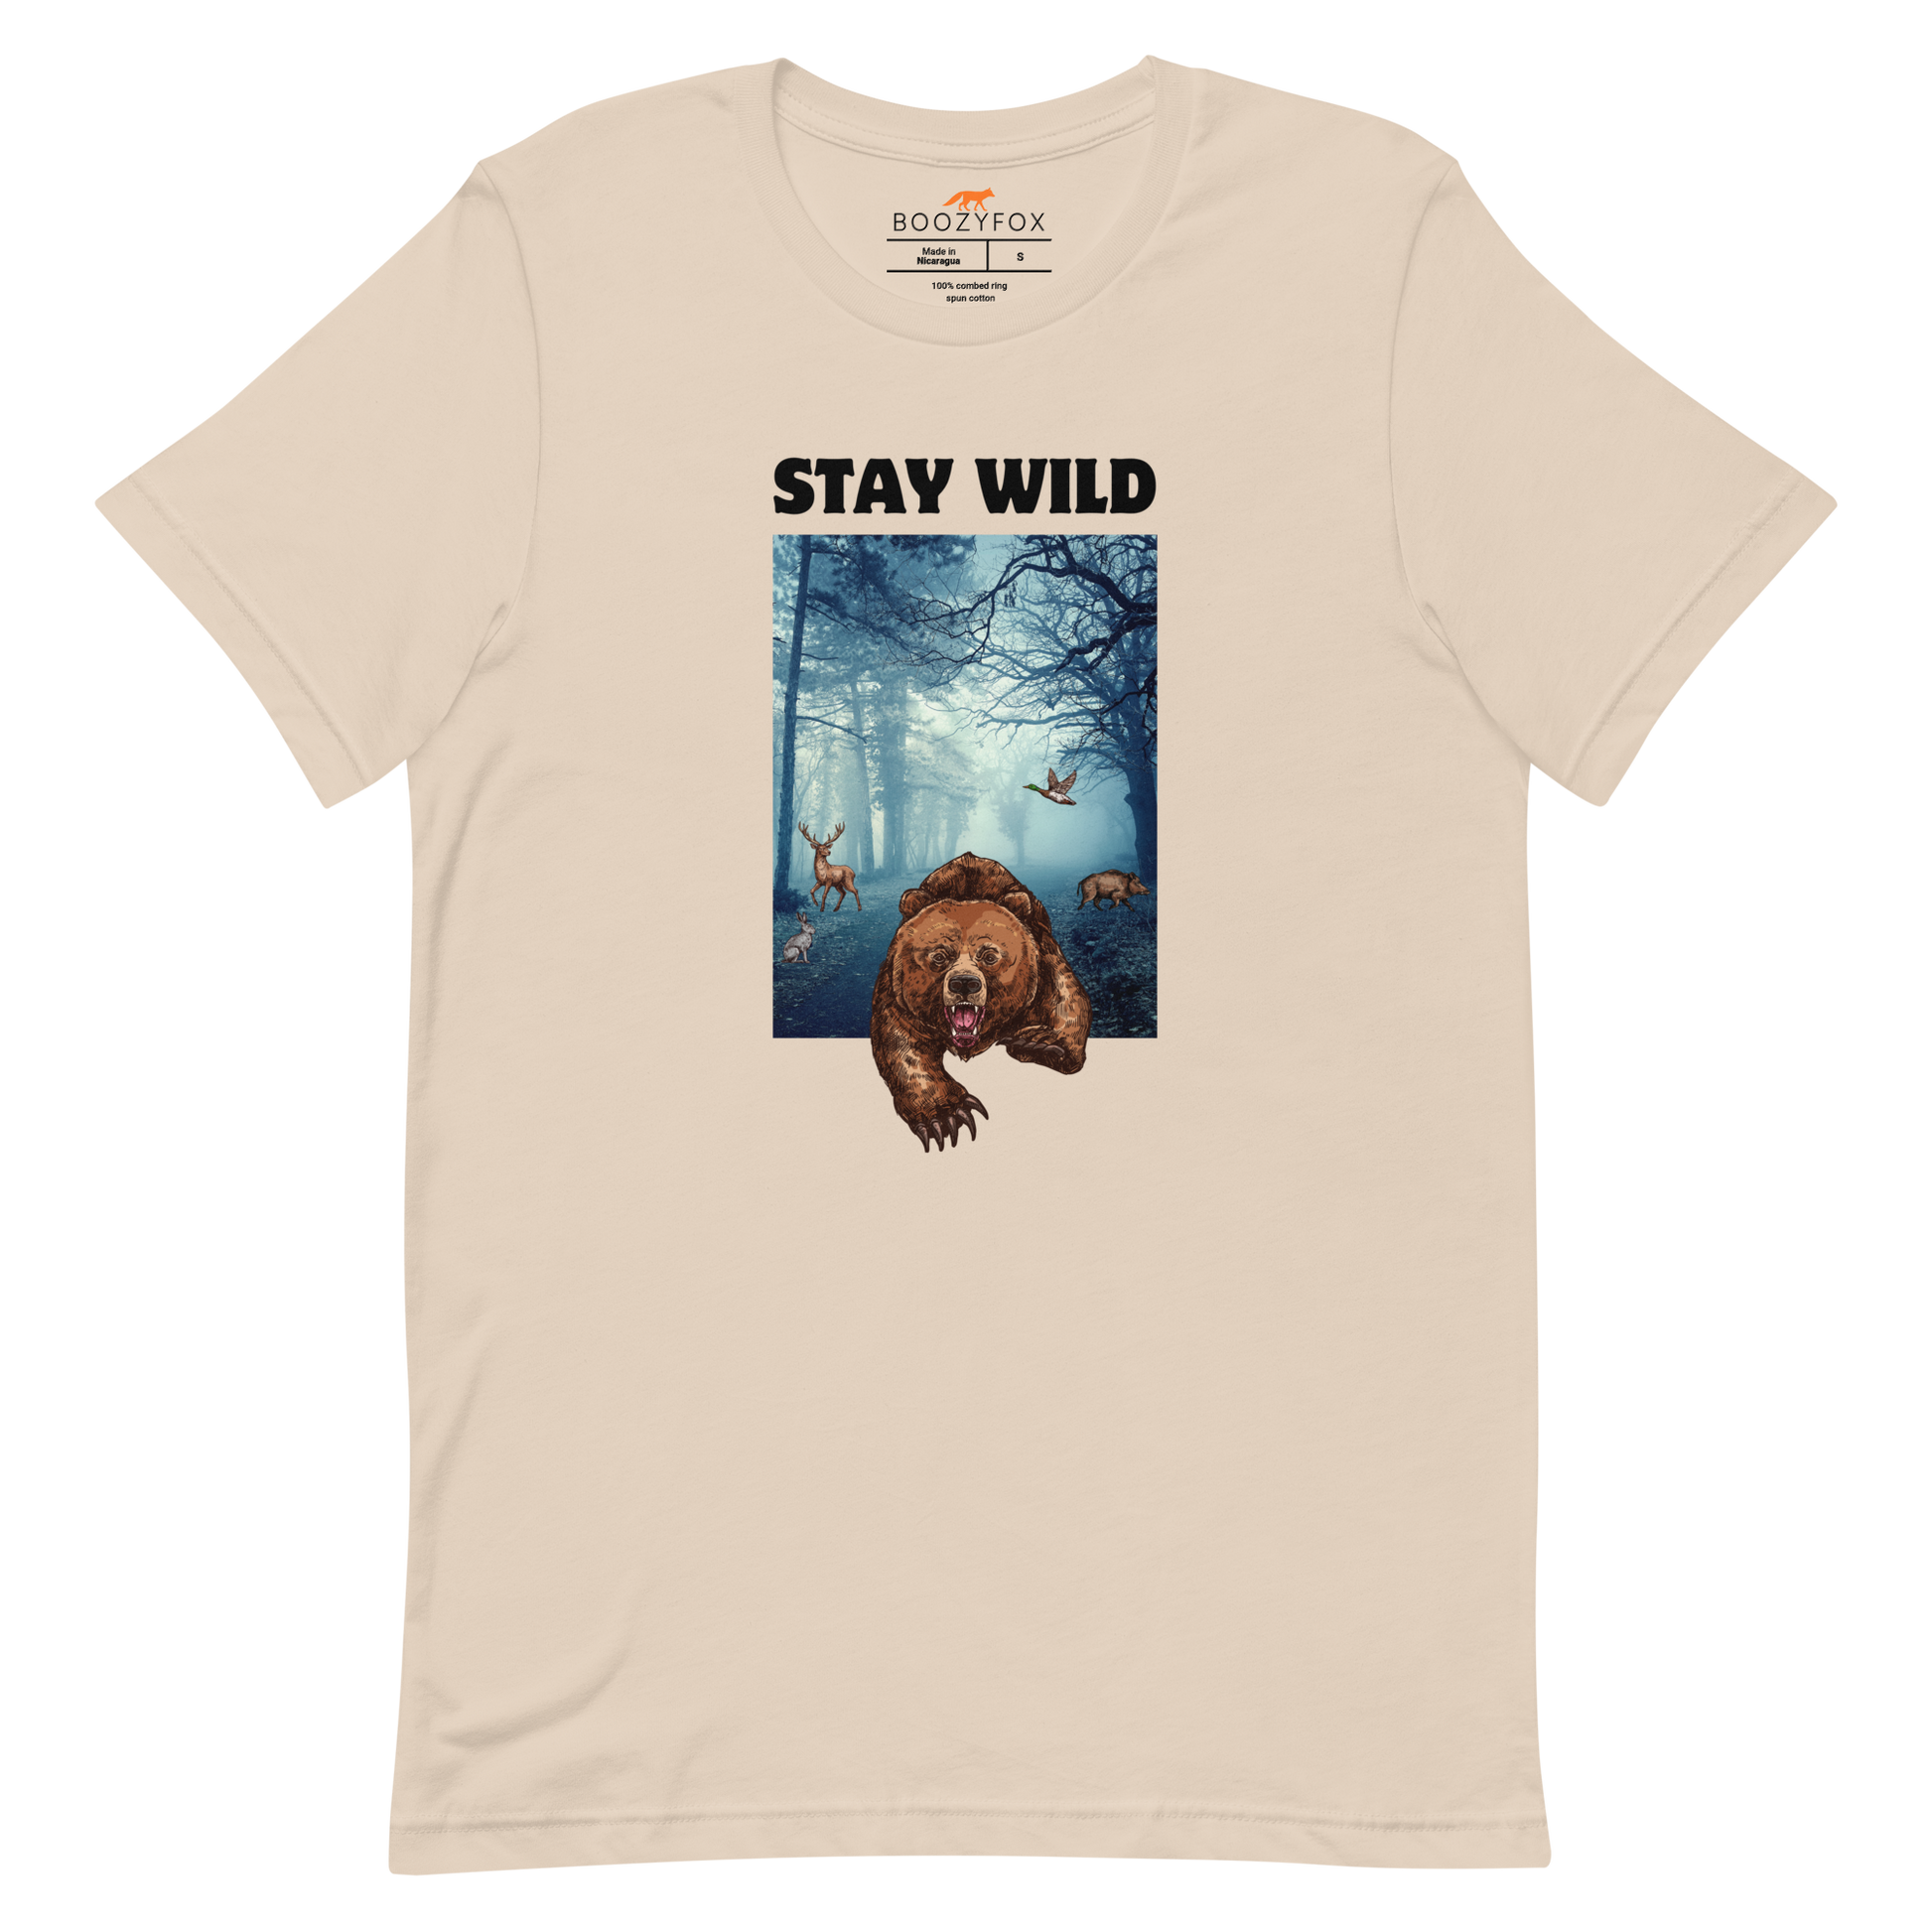 Soft Cream Premium Bear Tee featuring a Stay Wild graphic on the chest - Cool Graphic Bear Tees - Boozy Fox